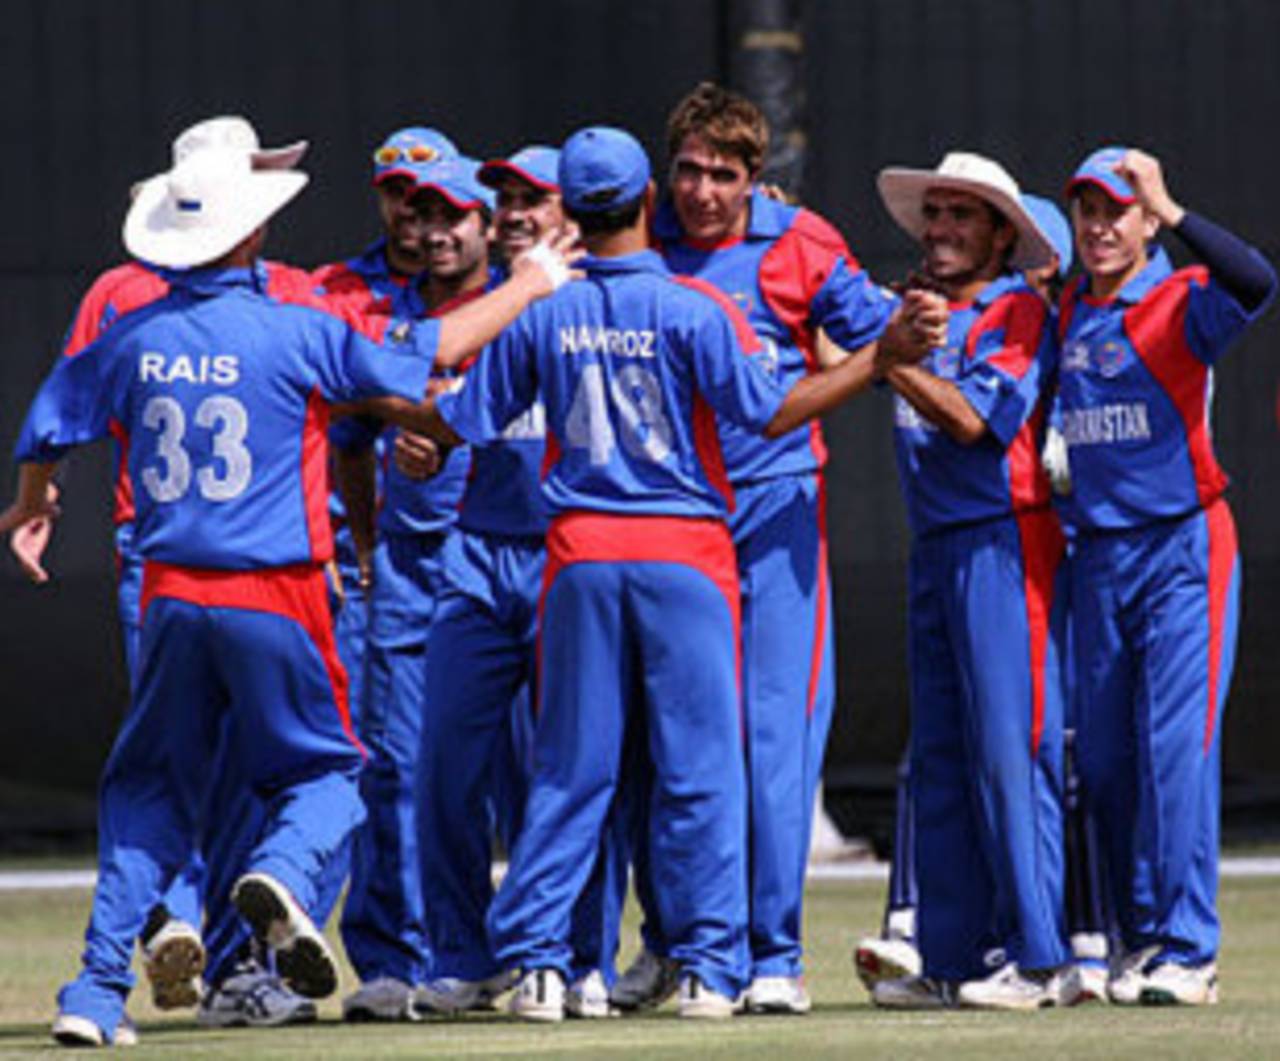 Afghanistan's success in the recent <a href="/db/ARCHIVE/2009/OD_TOURNEYS/ICC-WCQ/">ICC World Cup Qualifiers</a> has provided Affiliate nations with great inspiration&nbsp;&nbsp;&bull;&nbsp;&nbsp;International Cricket Council